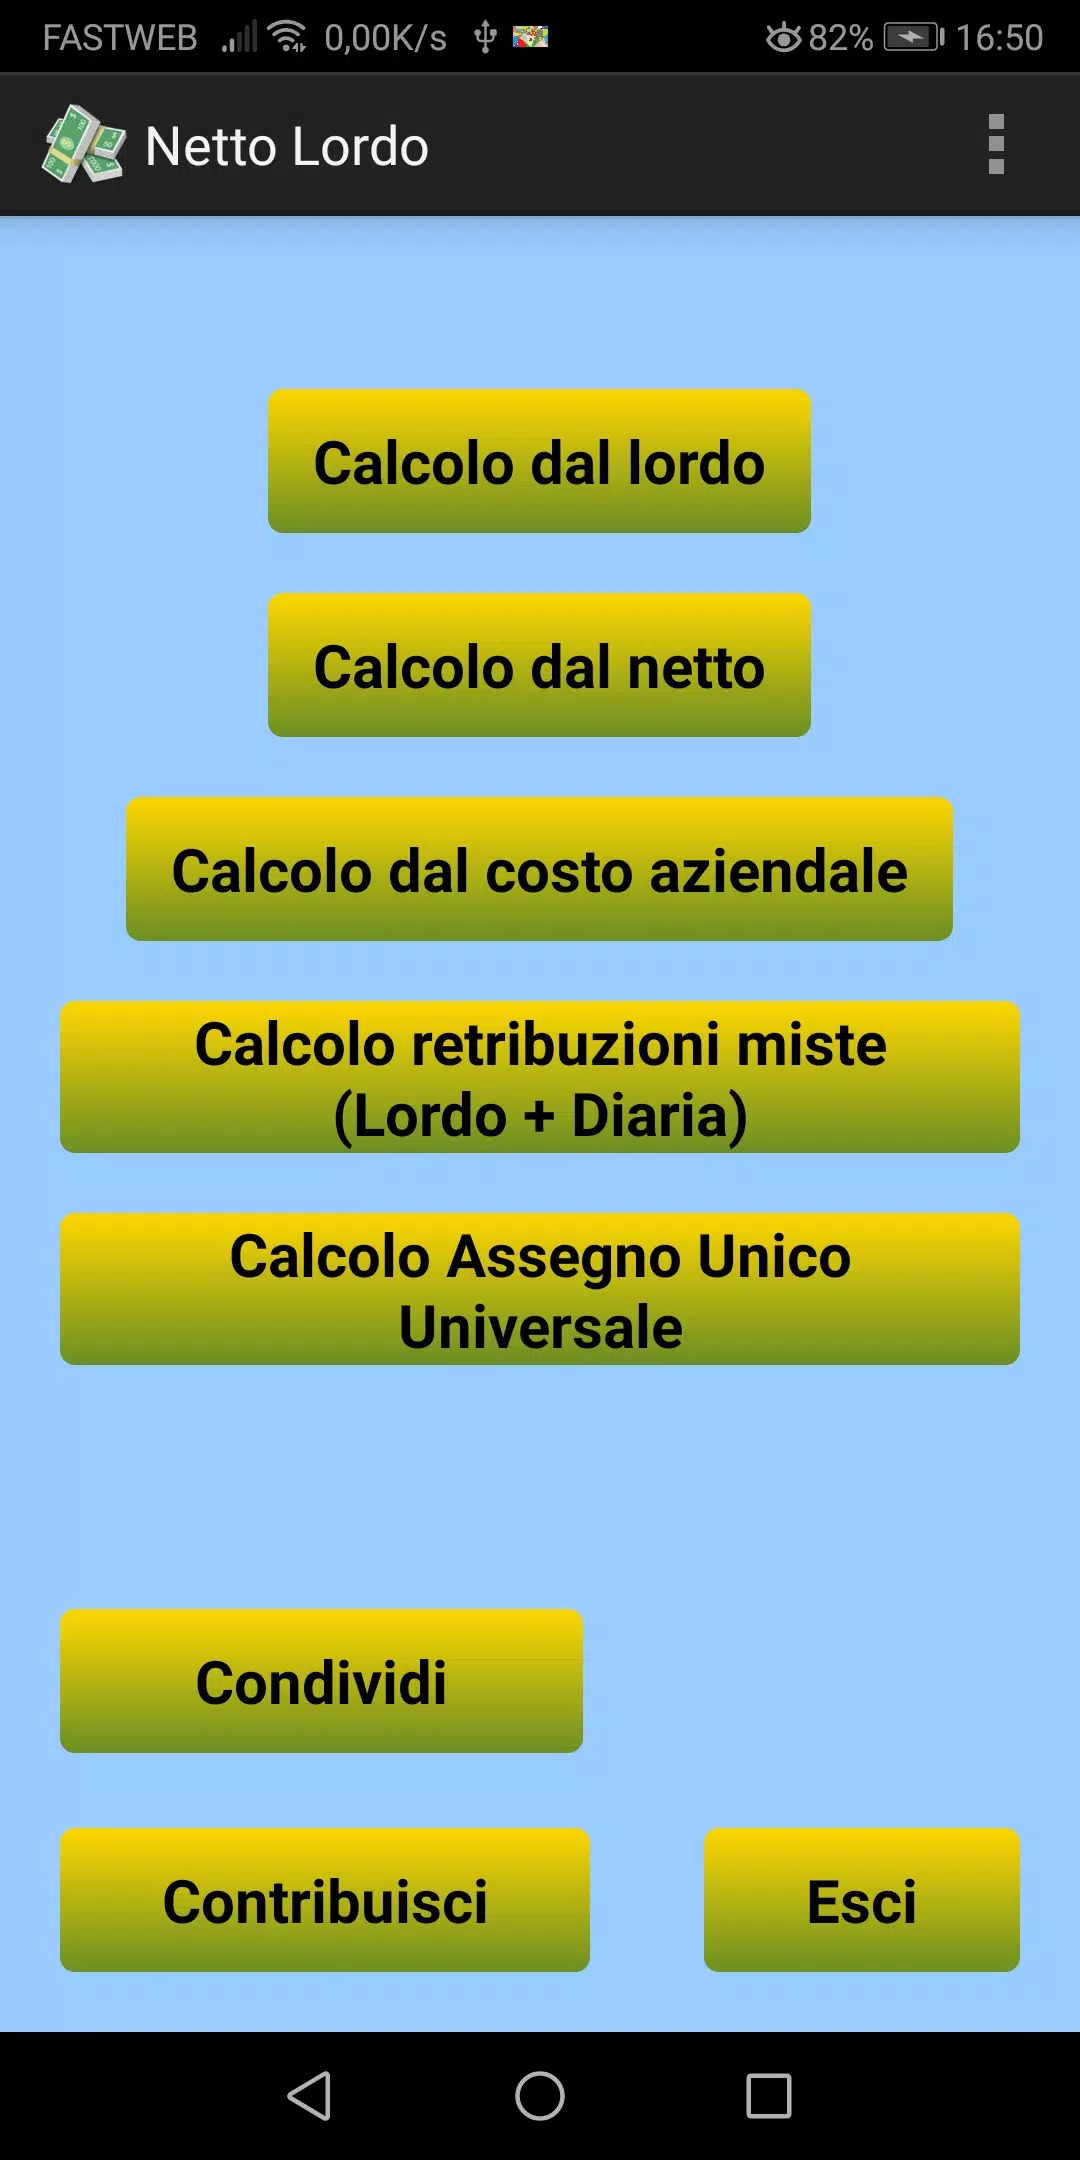 Netto Lordo APK for Android Download